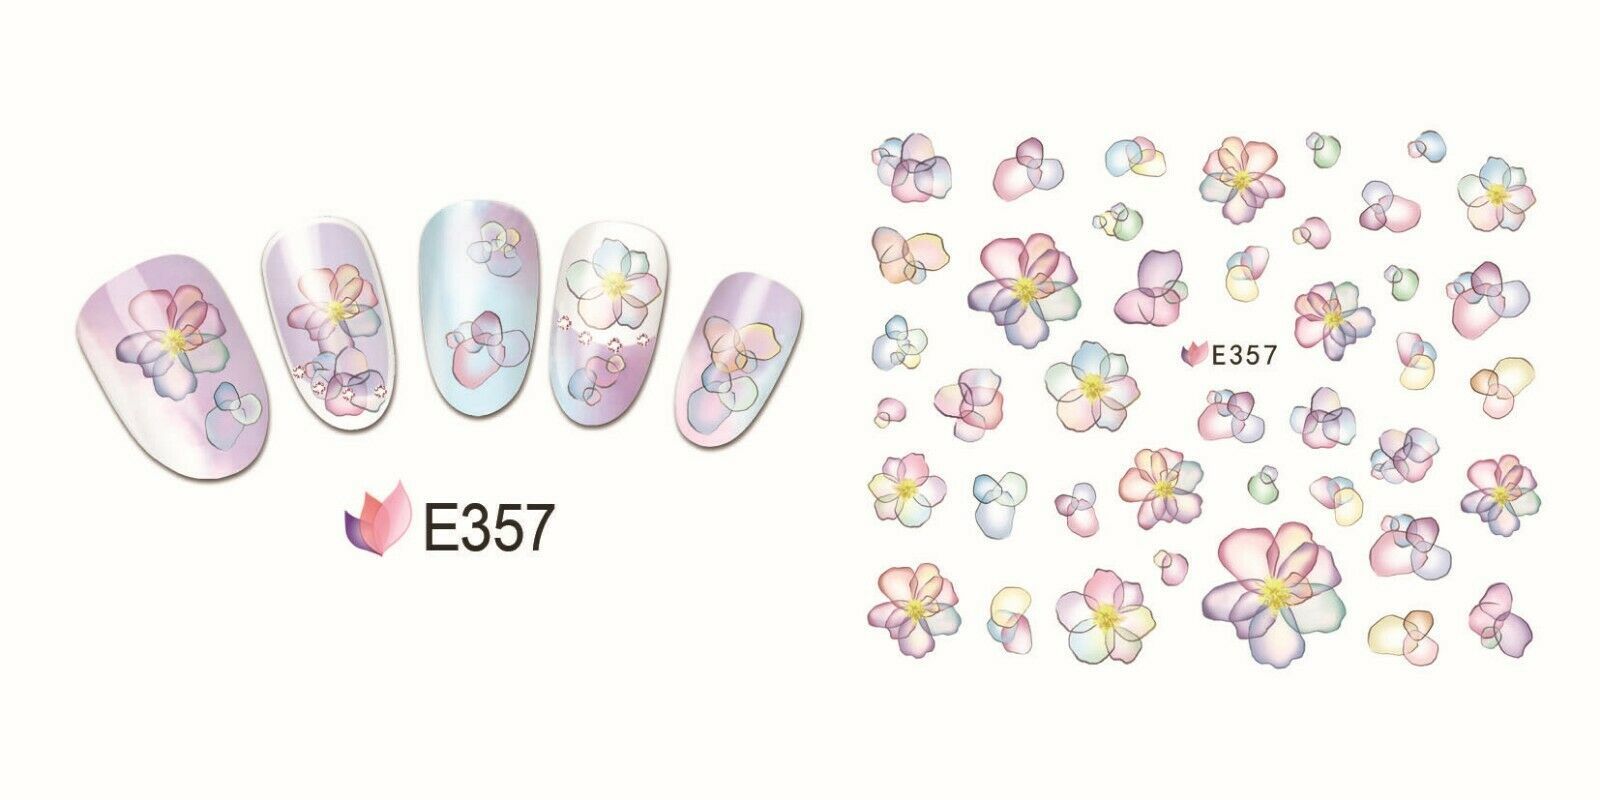 Nail Art 3D Decal Stickers Watercolored Multicolored Flowers E357